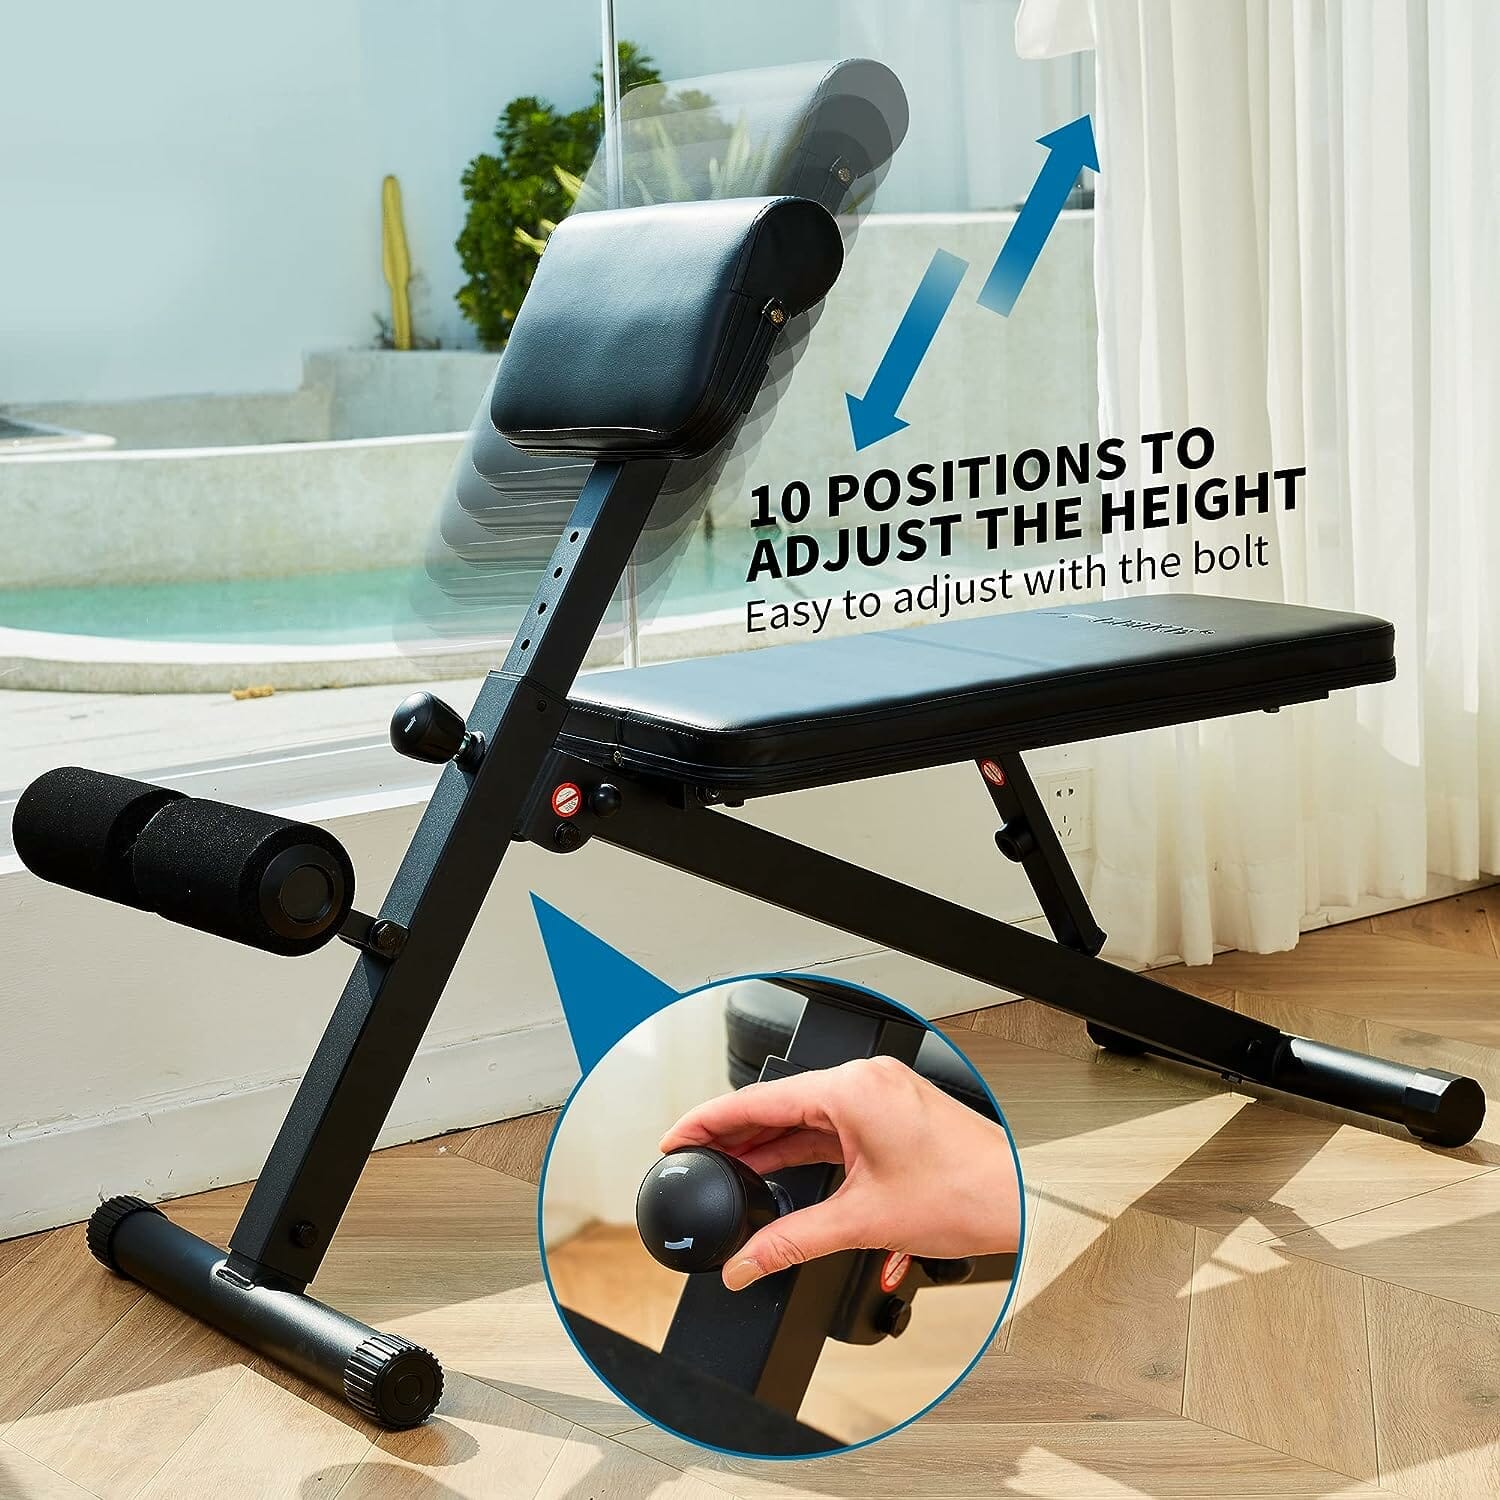 leikefitness roman chair adjustable weight bench foldable workout exercise bench full body strength training preacher cu 3 1